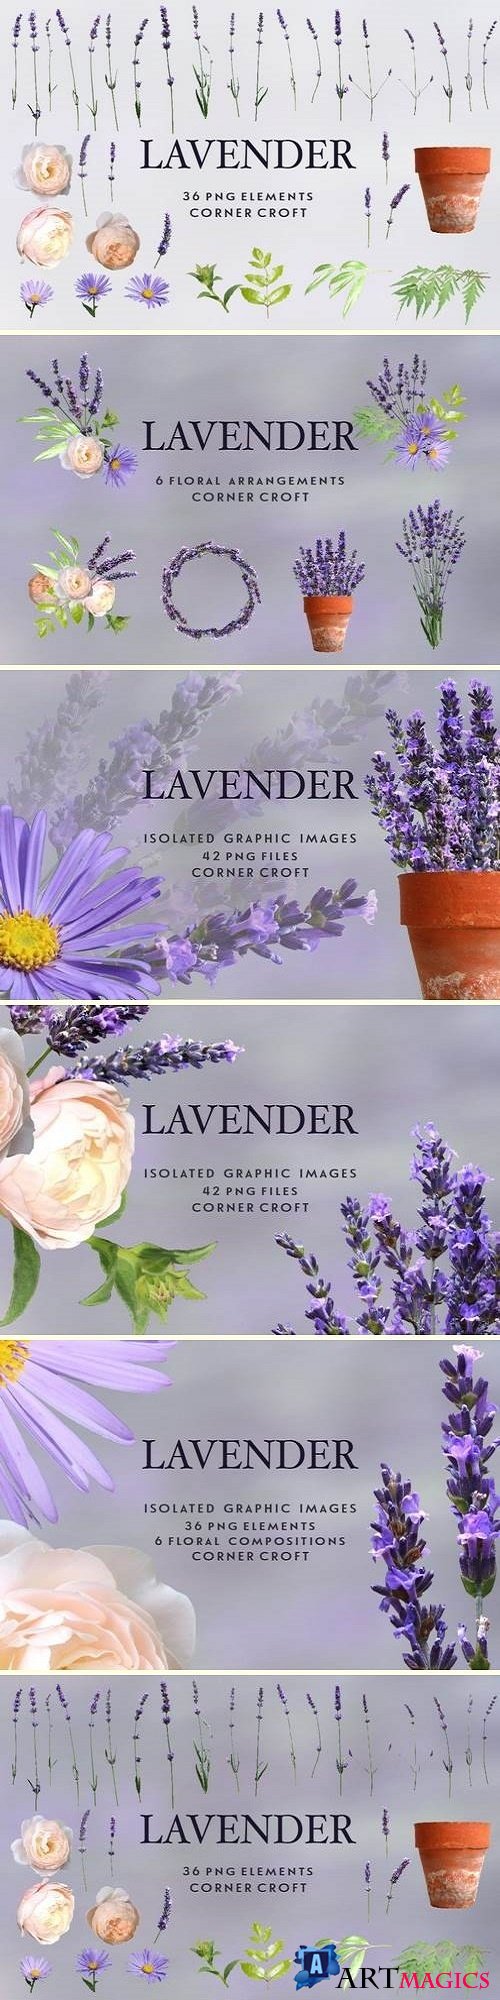 Lavender clipart, Isolated Lavender - 2795130